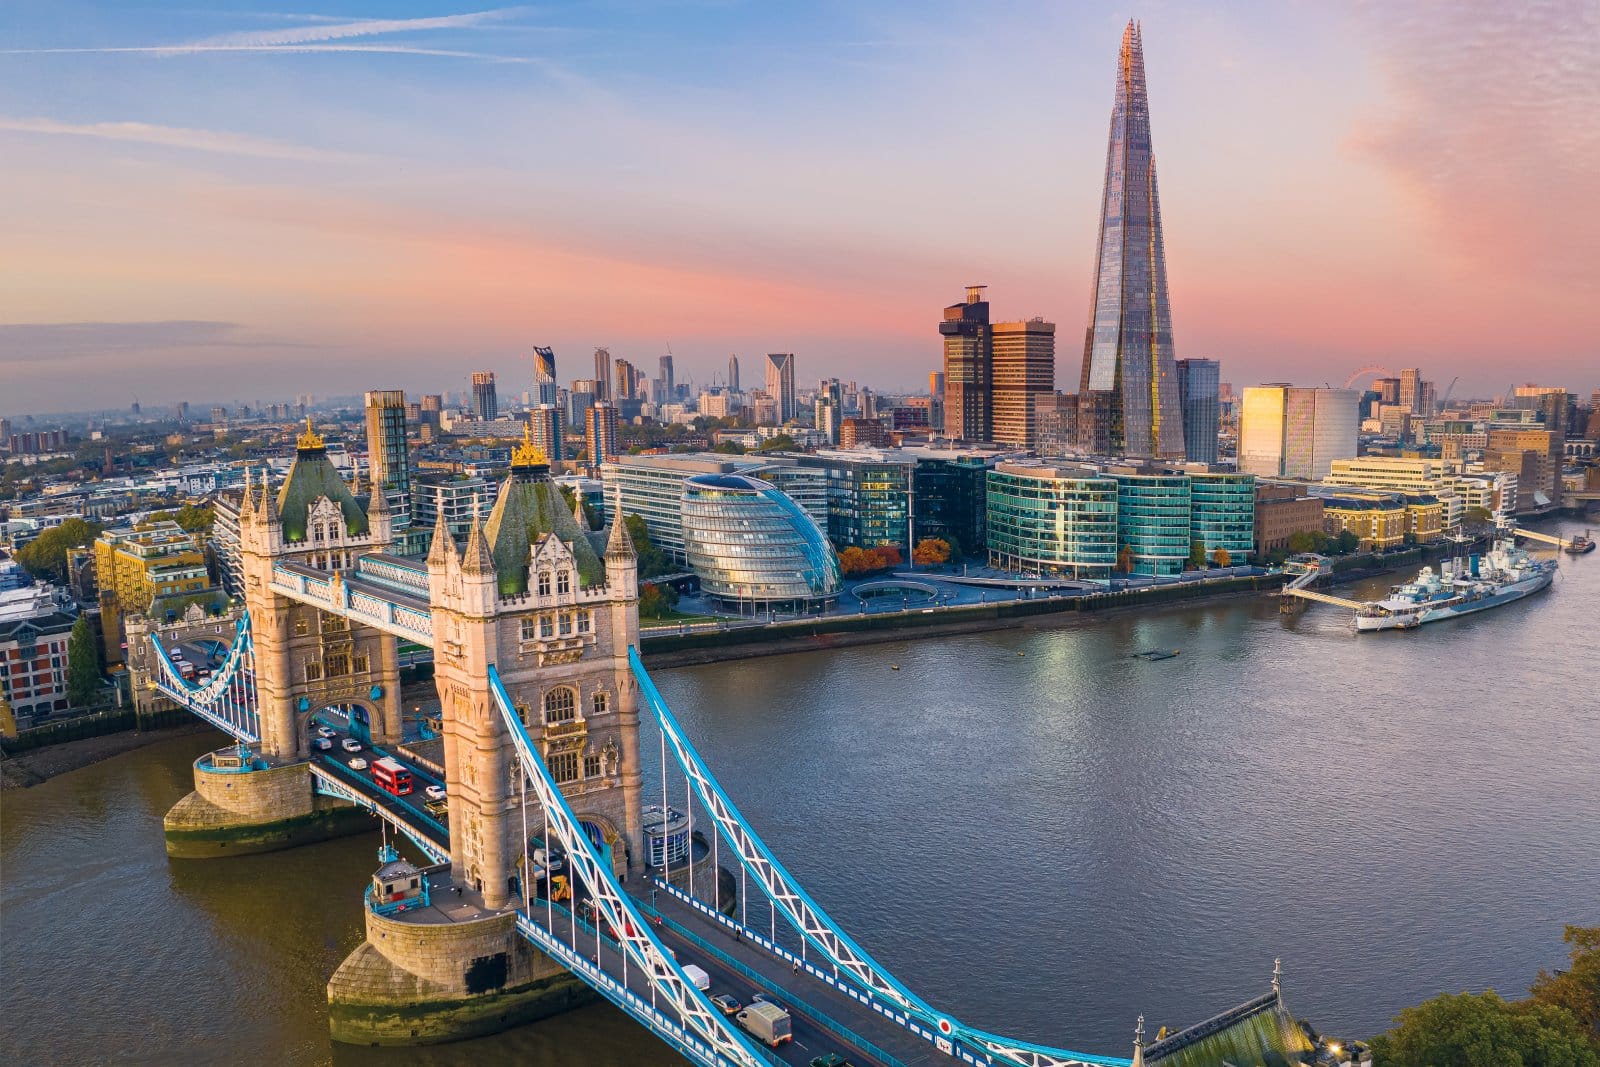 Image Credit: Shutterstock / Marek Masik <p>Soaring above London should be exhilarating, but the lofty admission fee brings visitors back down to Earth. Cloudy skies can further obscure both the view and the value.</p>